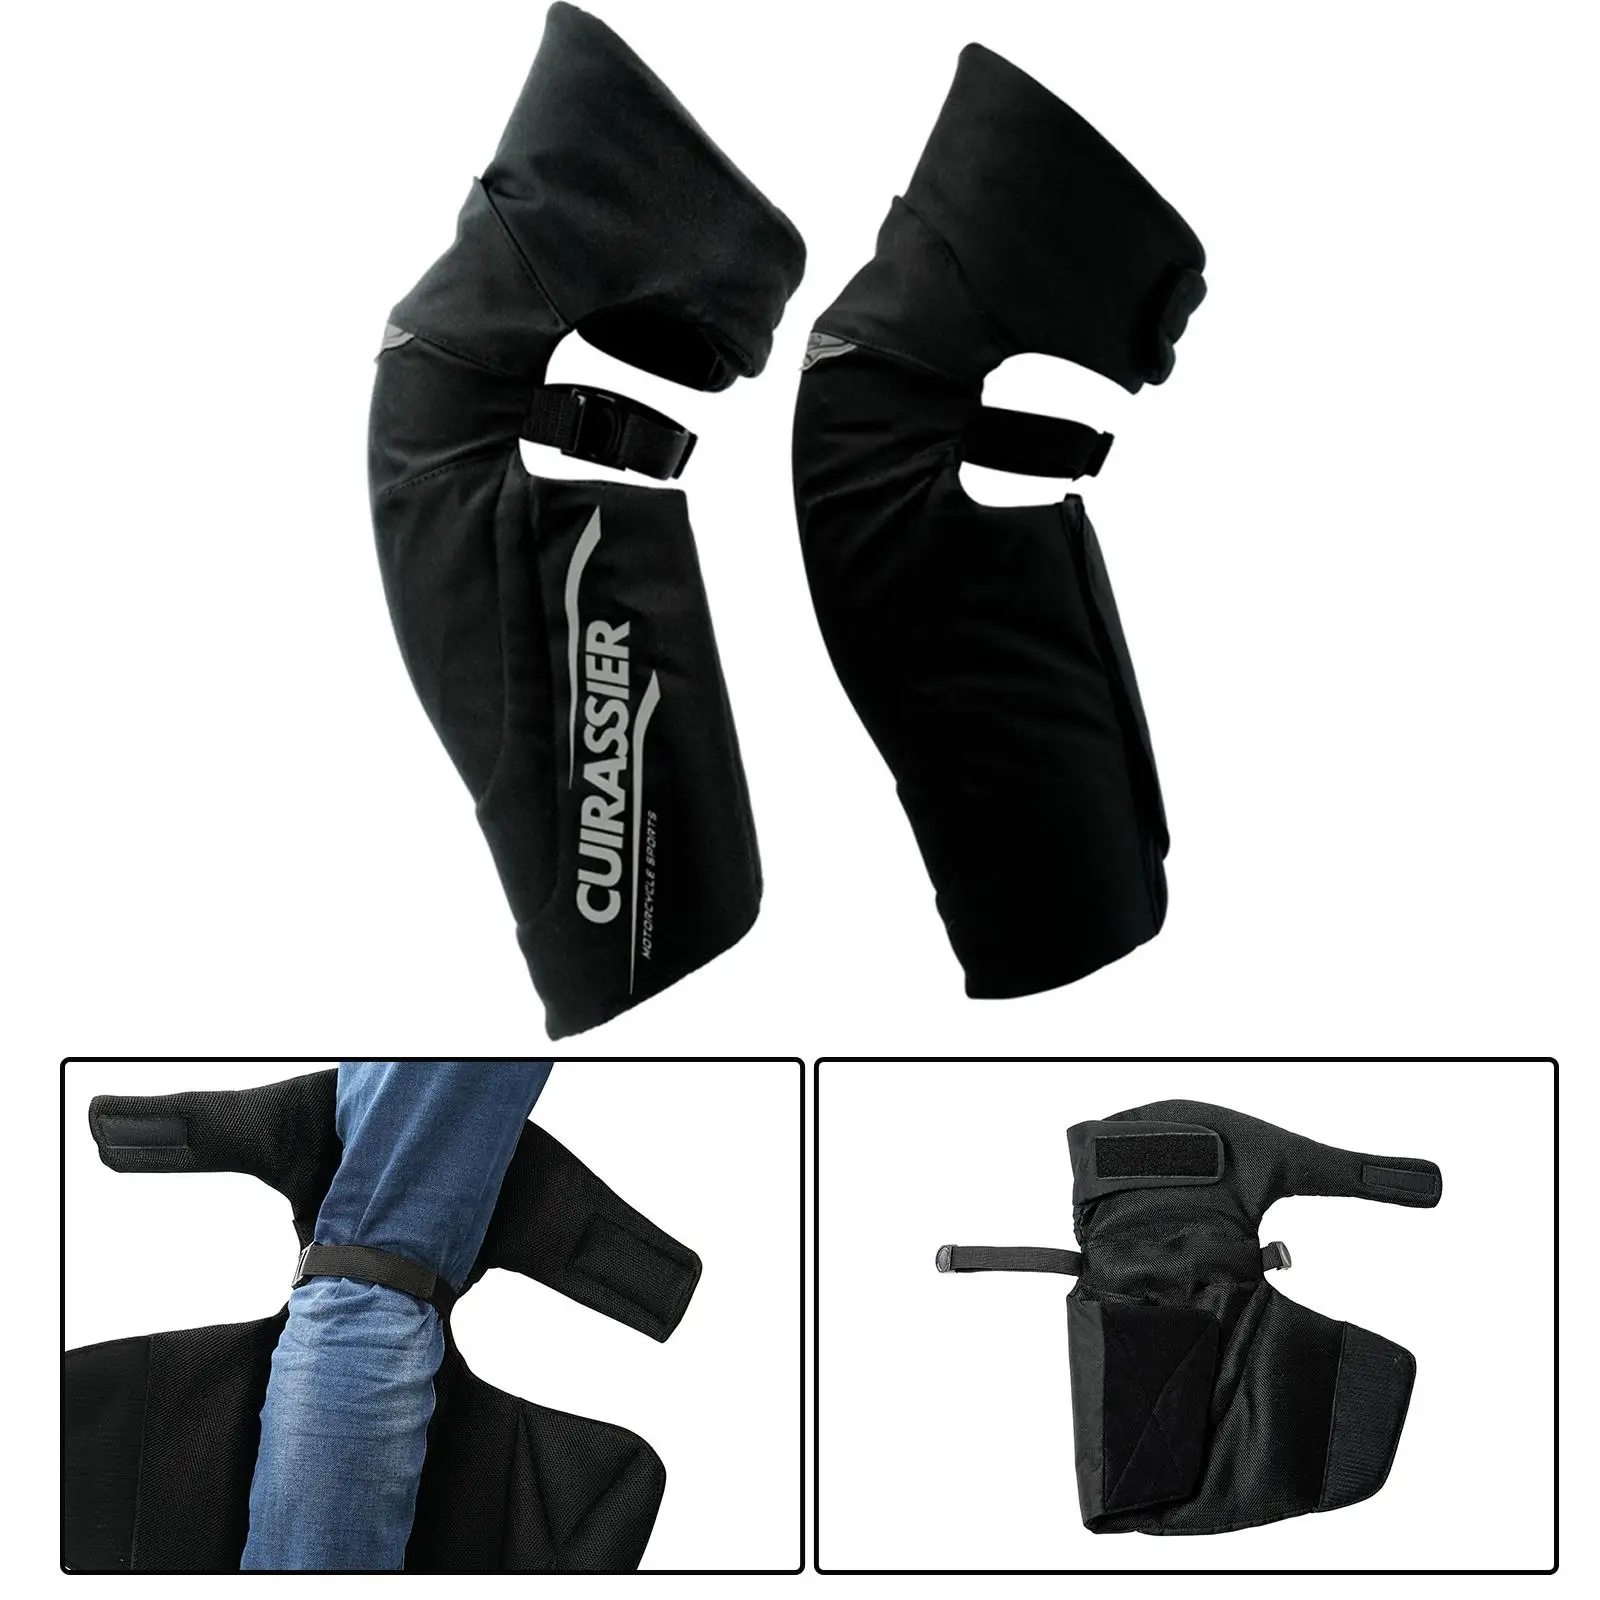 Motorcycle Knee Pads Knee Guards Cotton Padded Oxford Cloth Adjustable Strap Leggings Covers Protector Fits for Motocross Riding